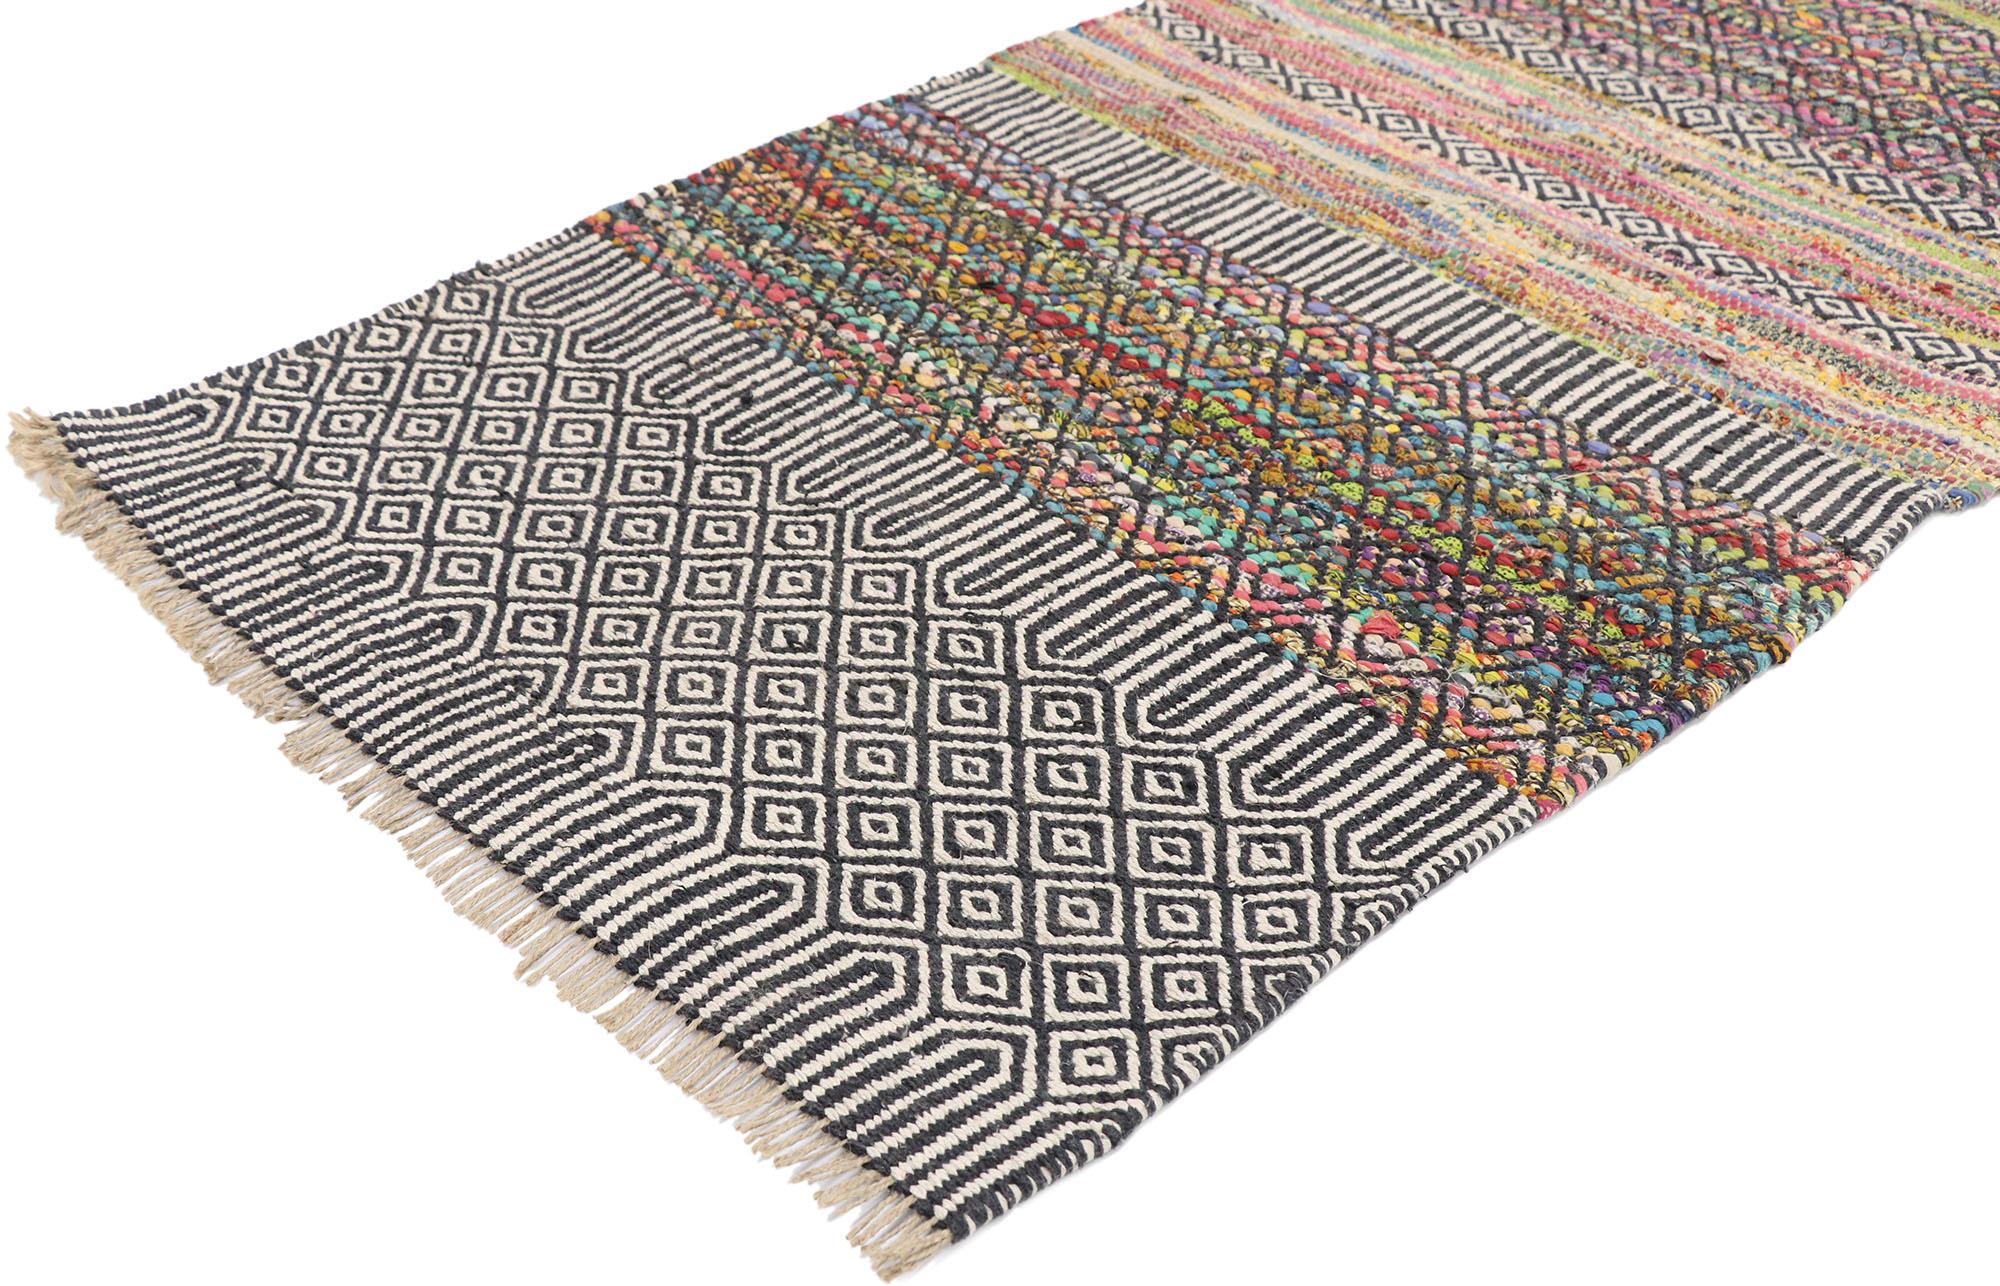 77648 vintage Zemmour Berber Moroccan Kilim rug with Boho Chic Tribal style. Full of tiny details and a bold expressive design combined with vibrant colors and tribal vibes, this hand-woven wool vintage Zemmour Berber Moroccan kilim rug is a